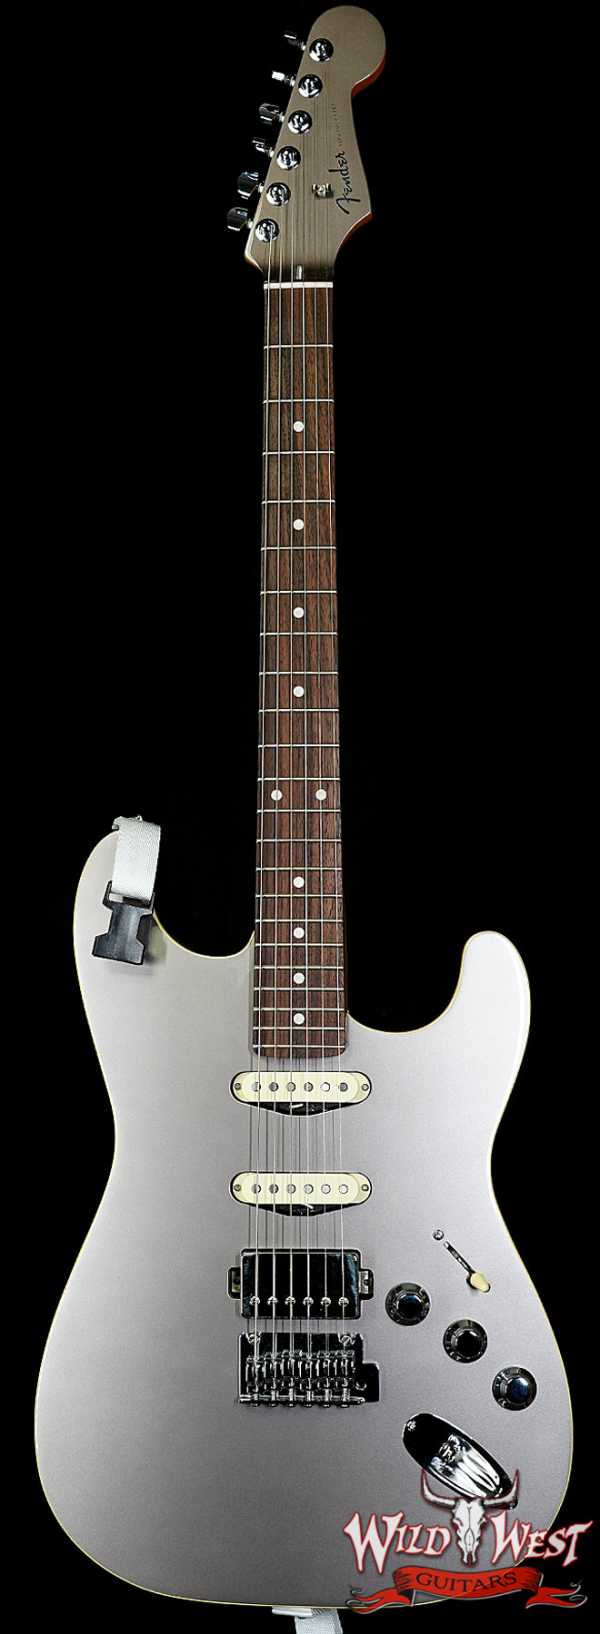 Jim Root Collection Fender Aerodyne Special Stratocaster HSS Dolphin Gray Metallic 7.75 LBS